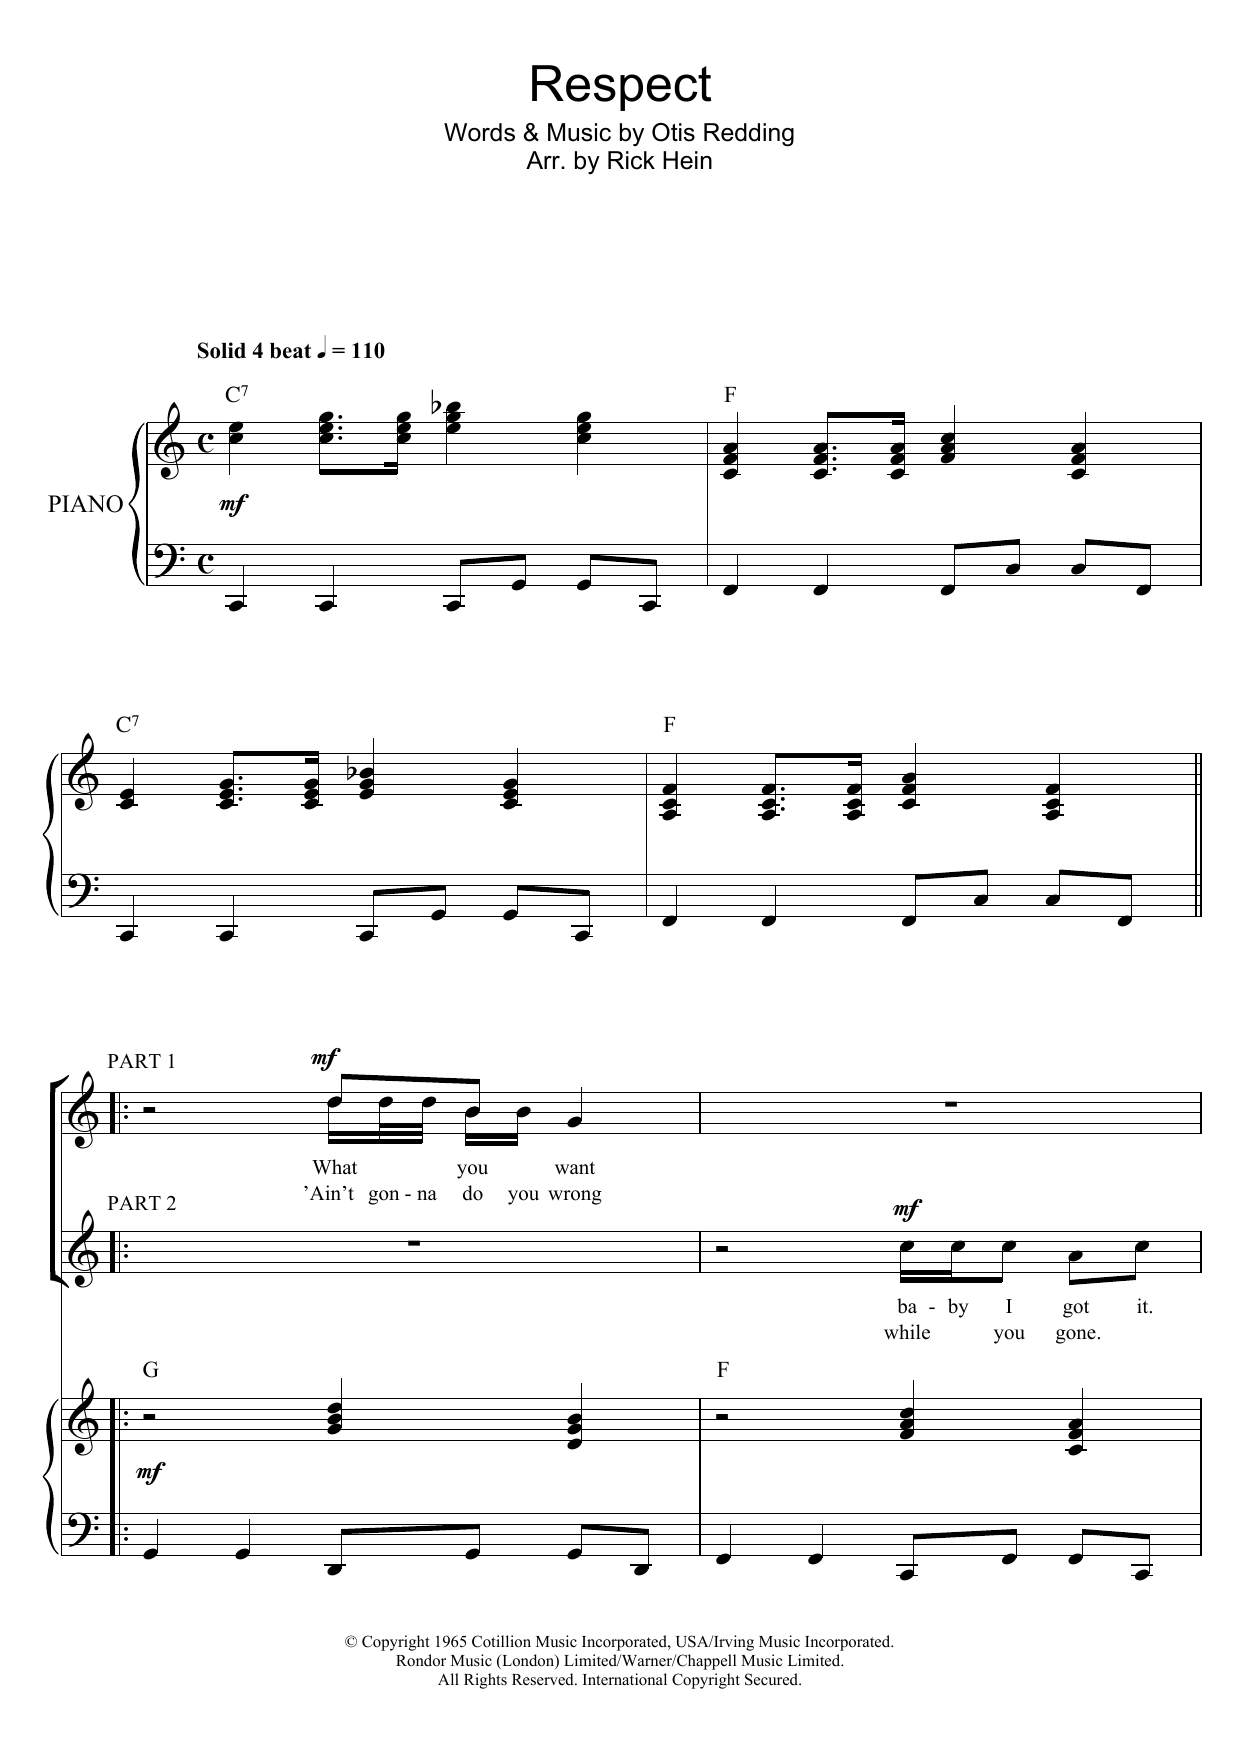 Aretha Franklin Respect (arr. Rick Hein) sheet music notes and chords. Download Printable PDF.